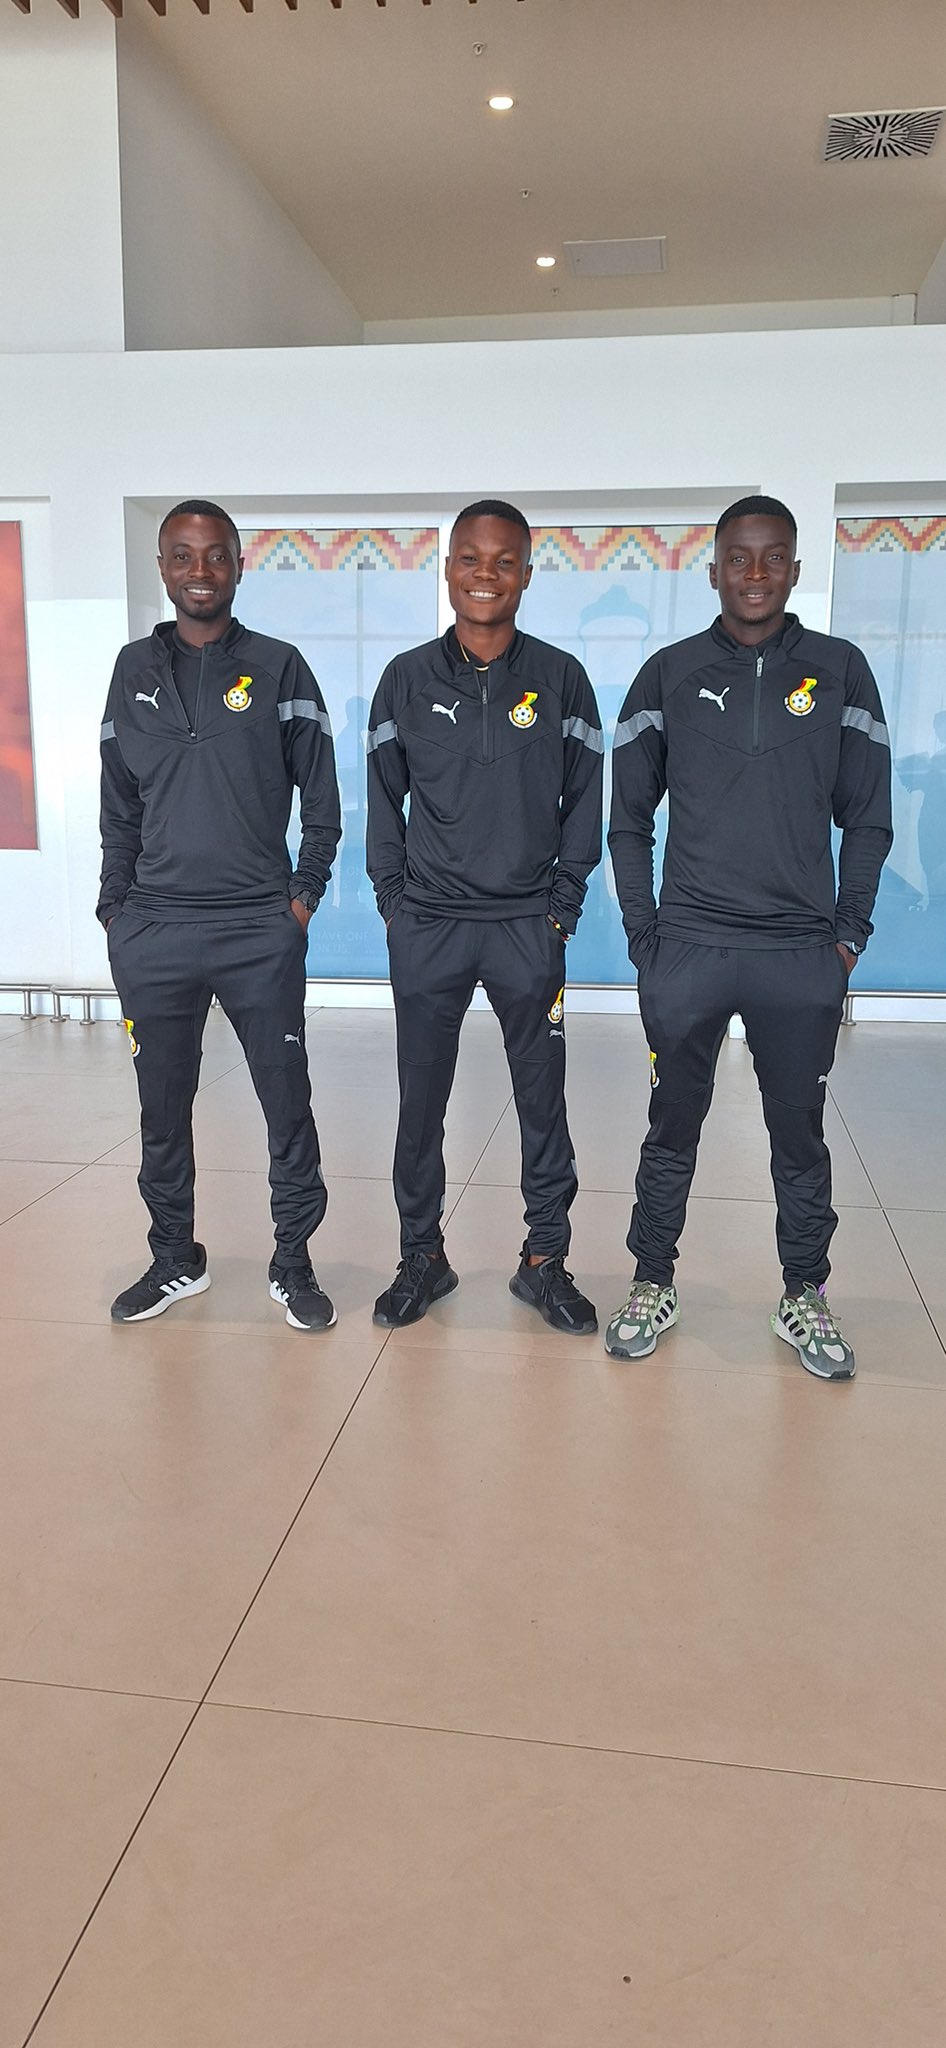 Three Ghanaian referees arrive in Cairo for FIFA course